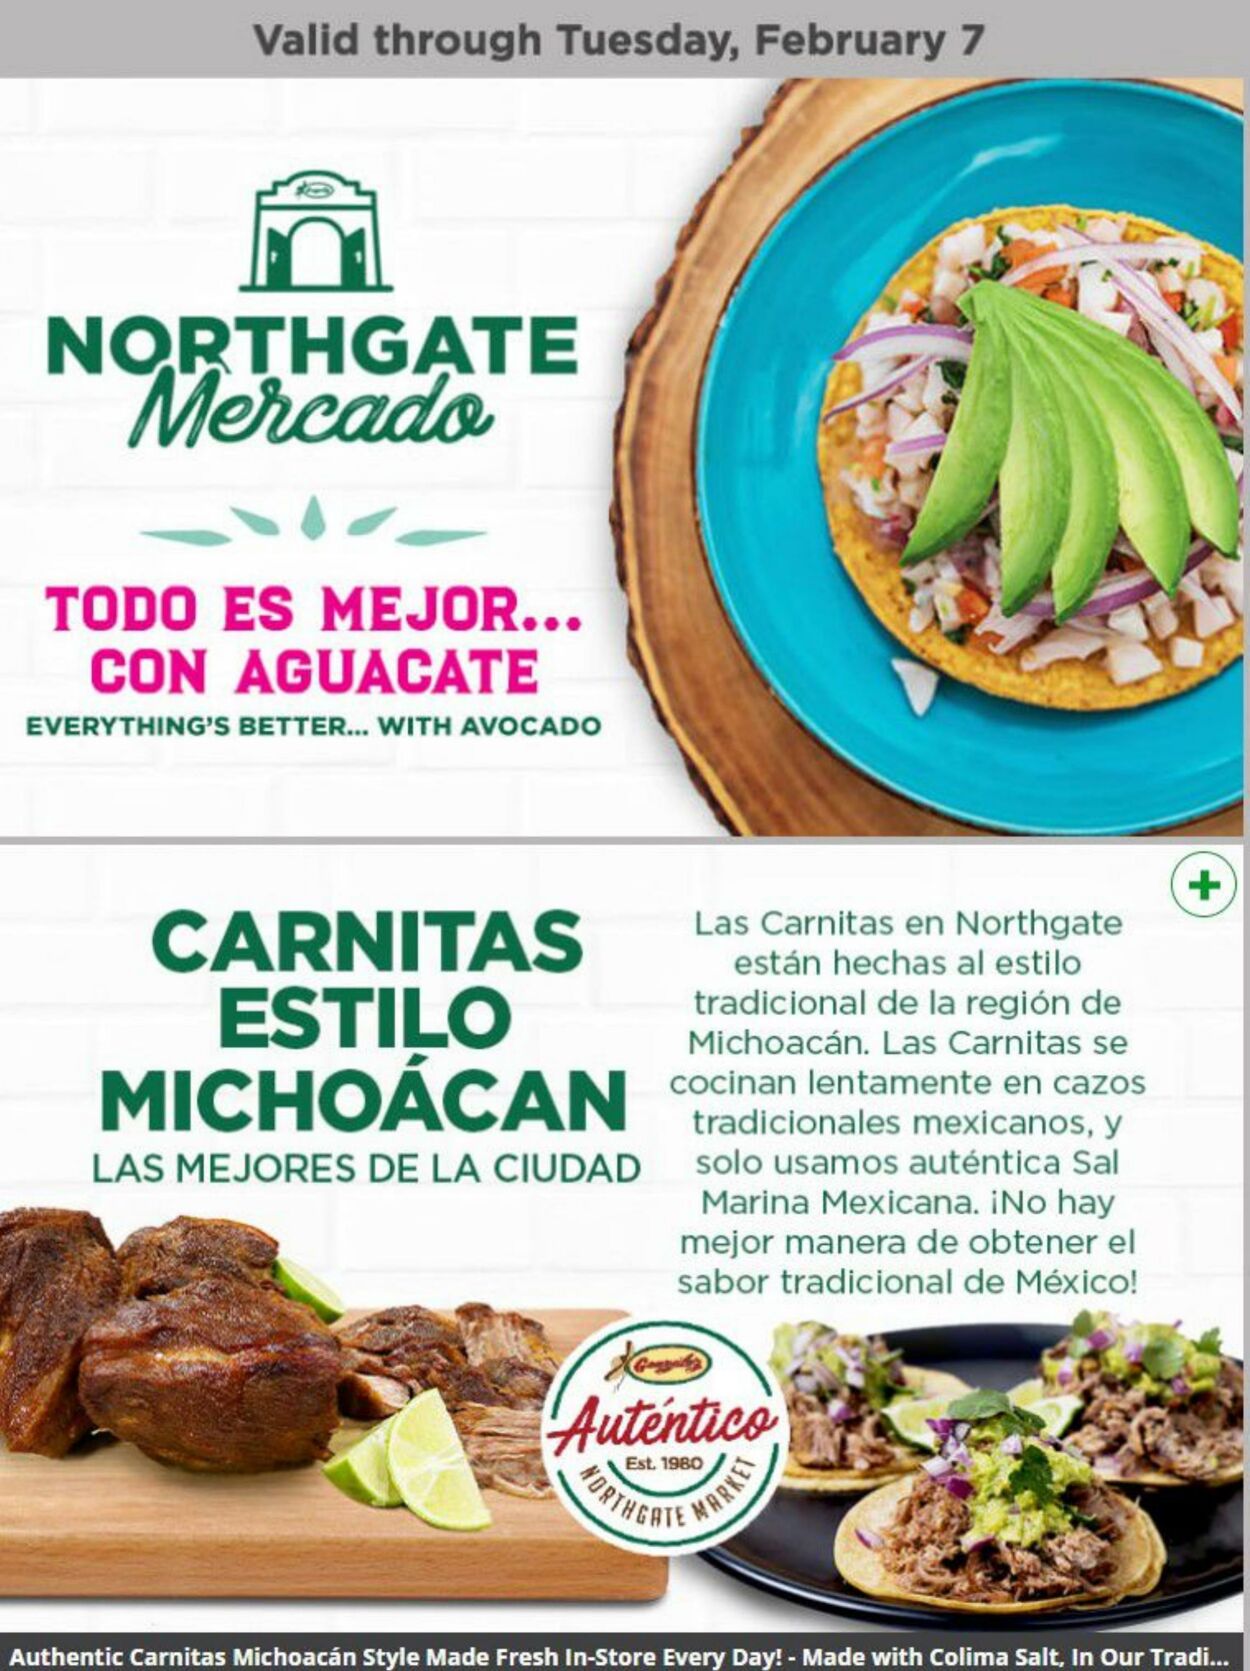 Northgate Market Promotional weekly ads